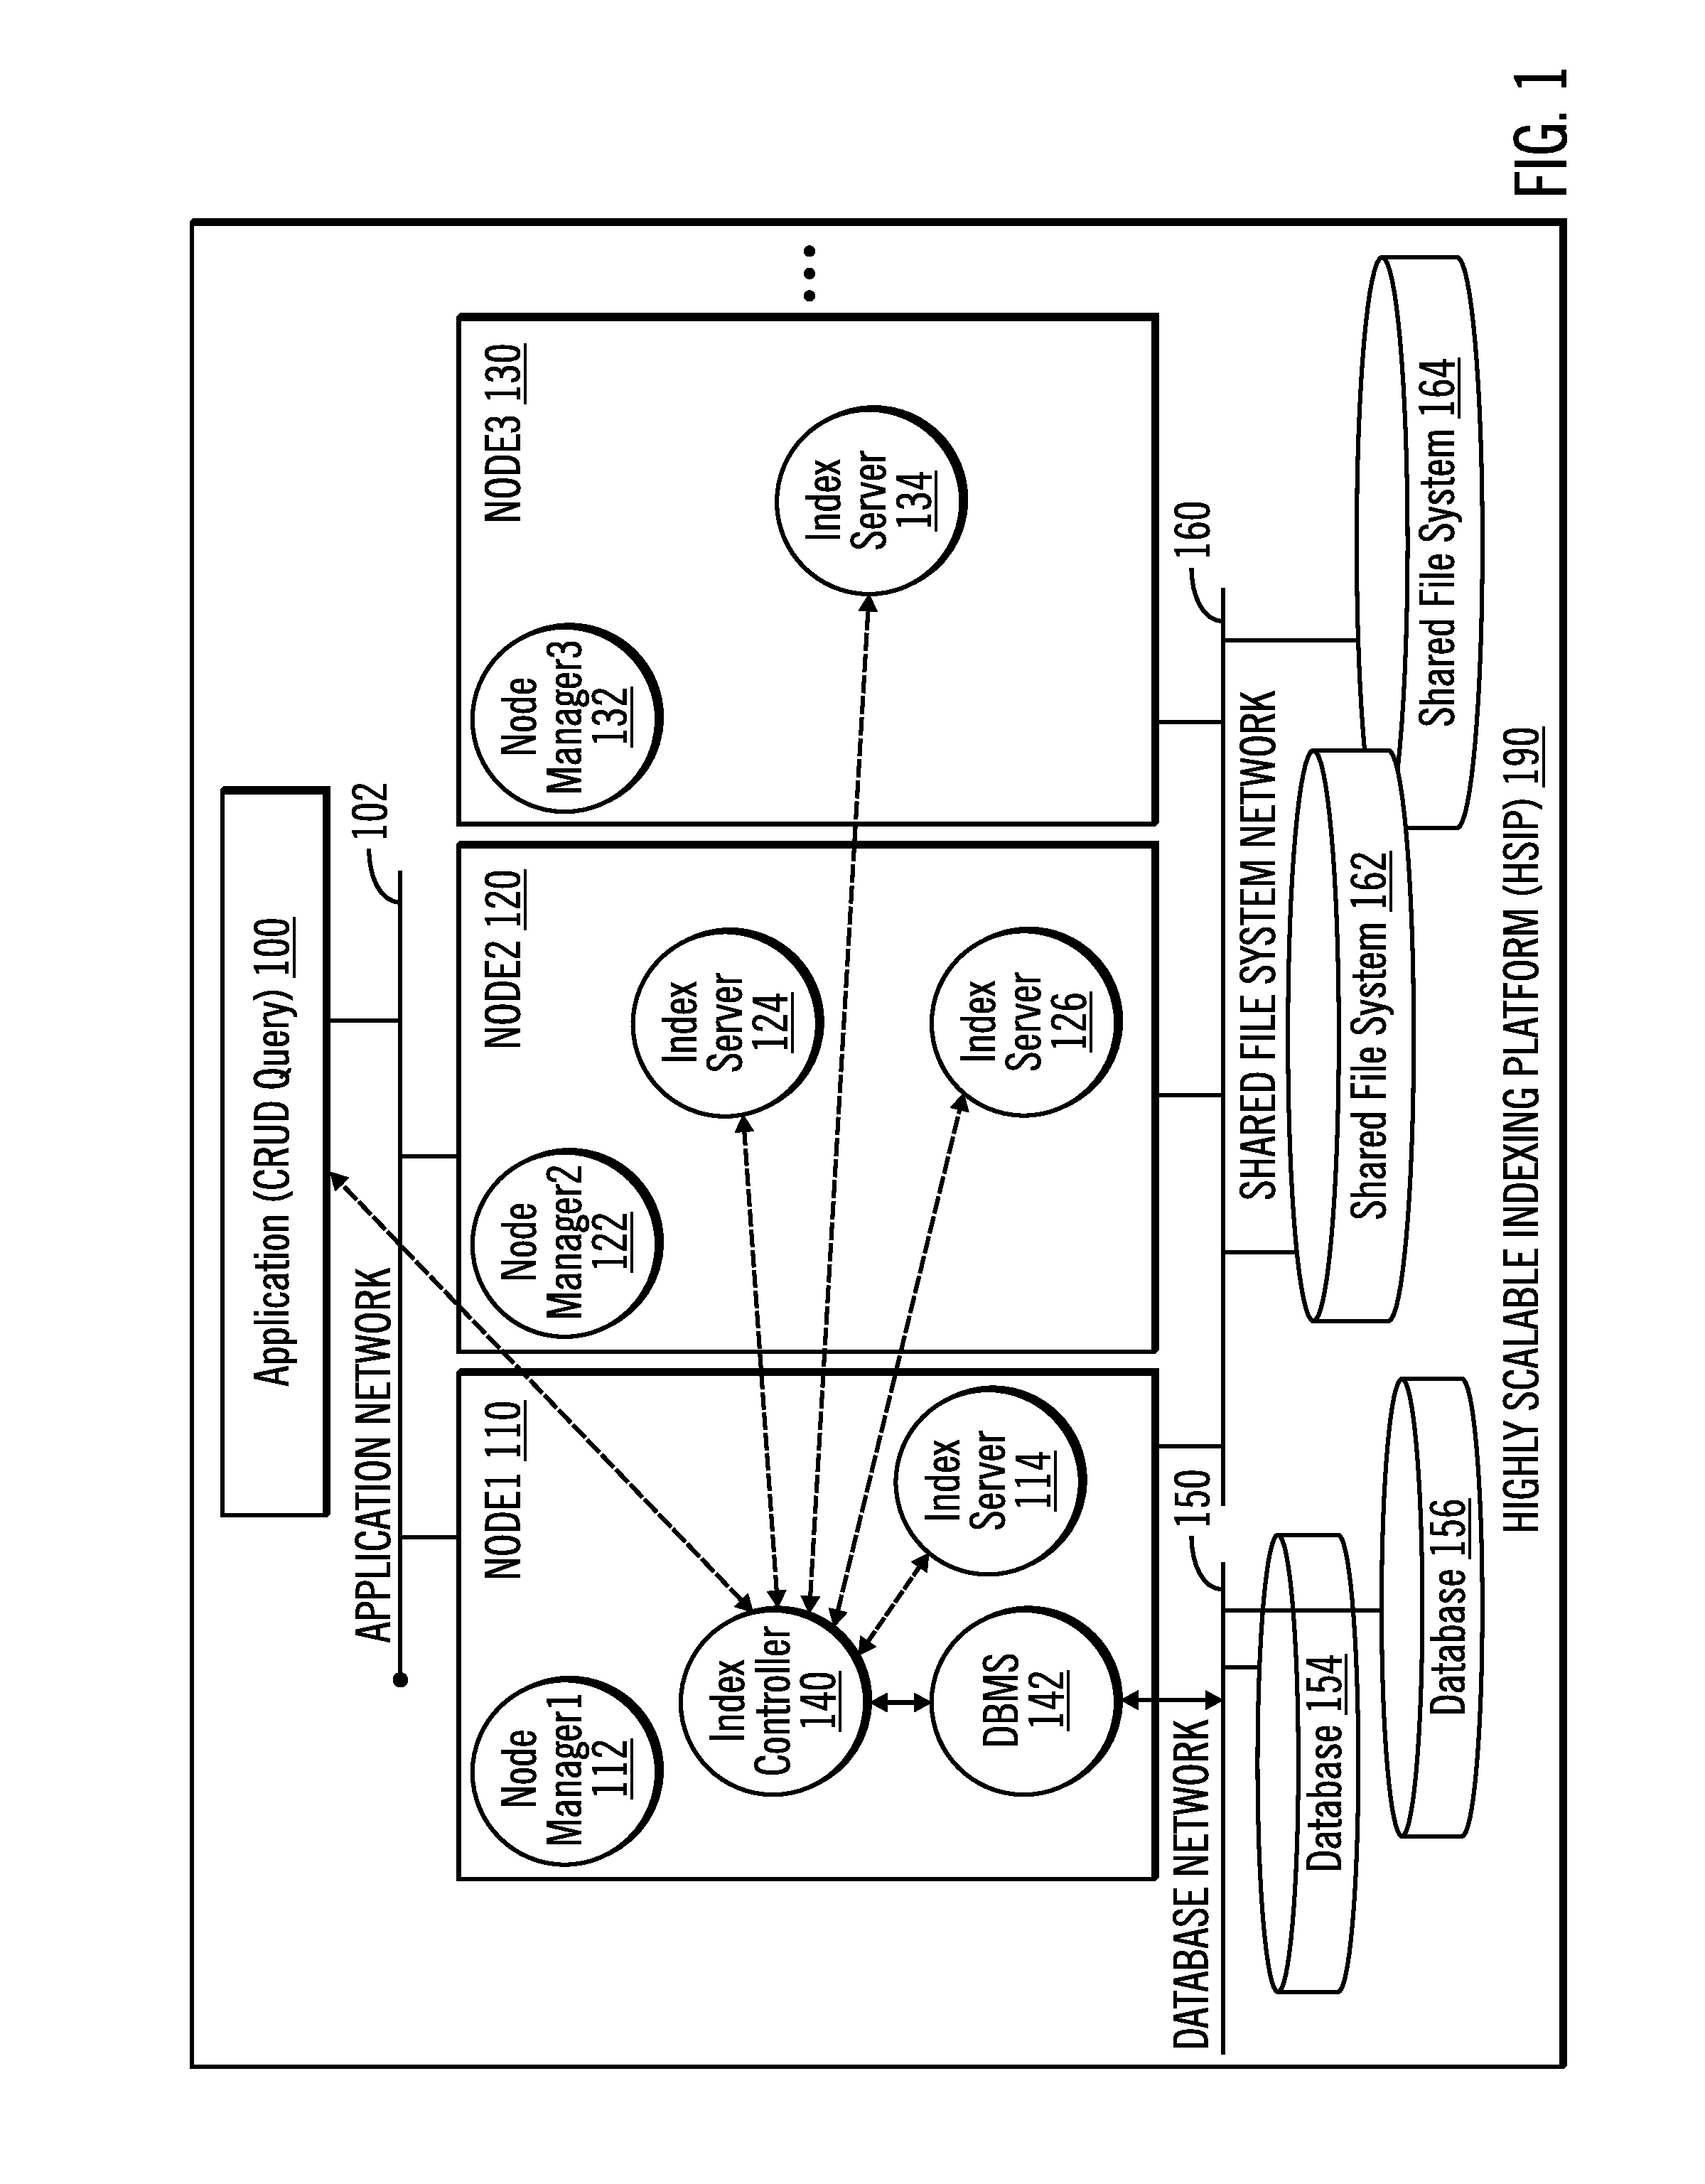 Index partition maintenance over monotonically addressed document sequences